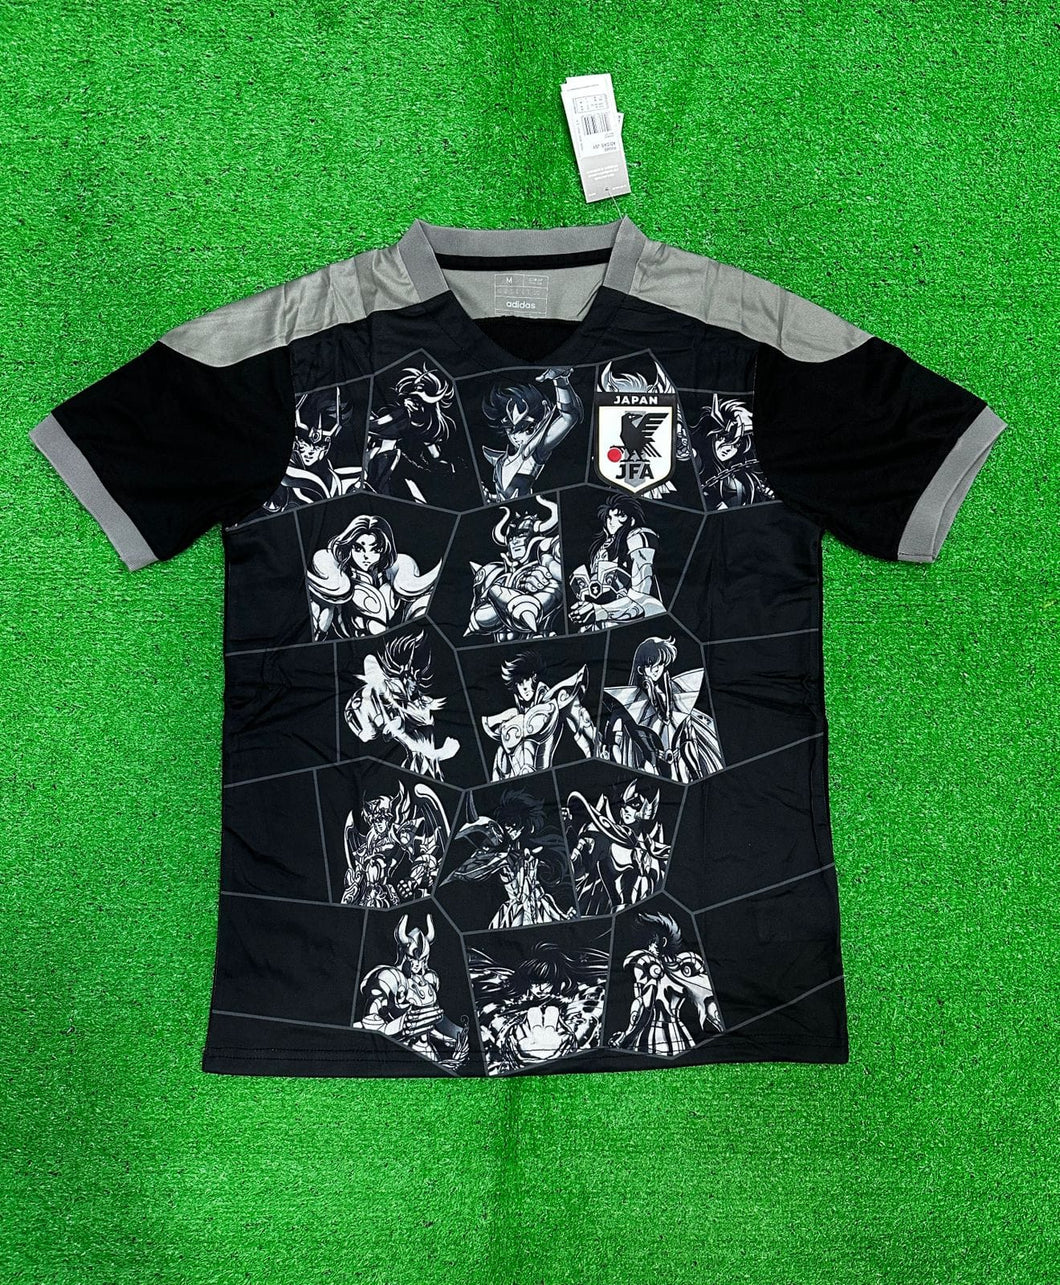 JAPAN BLACK ANIME SPECIAL EDITION JERSEY